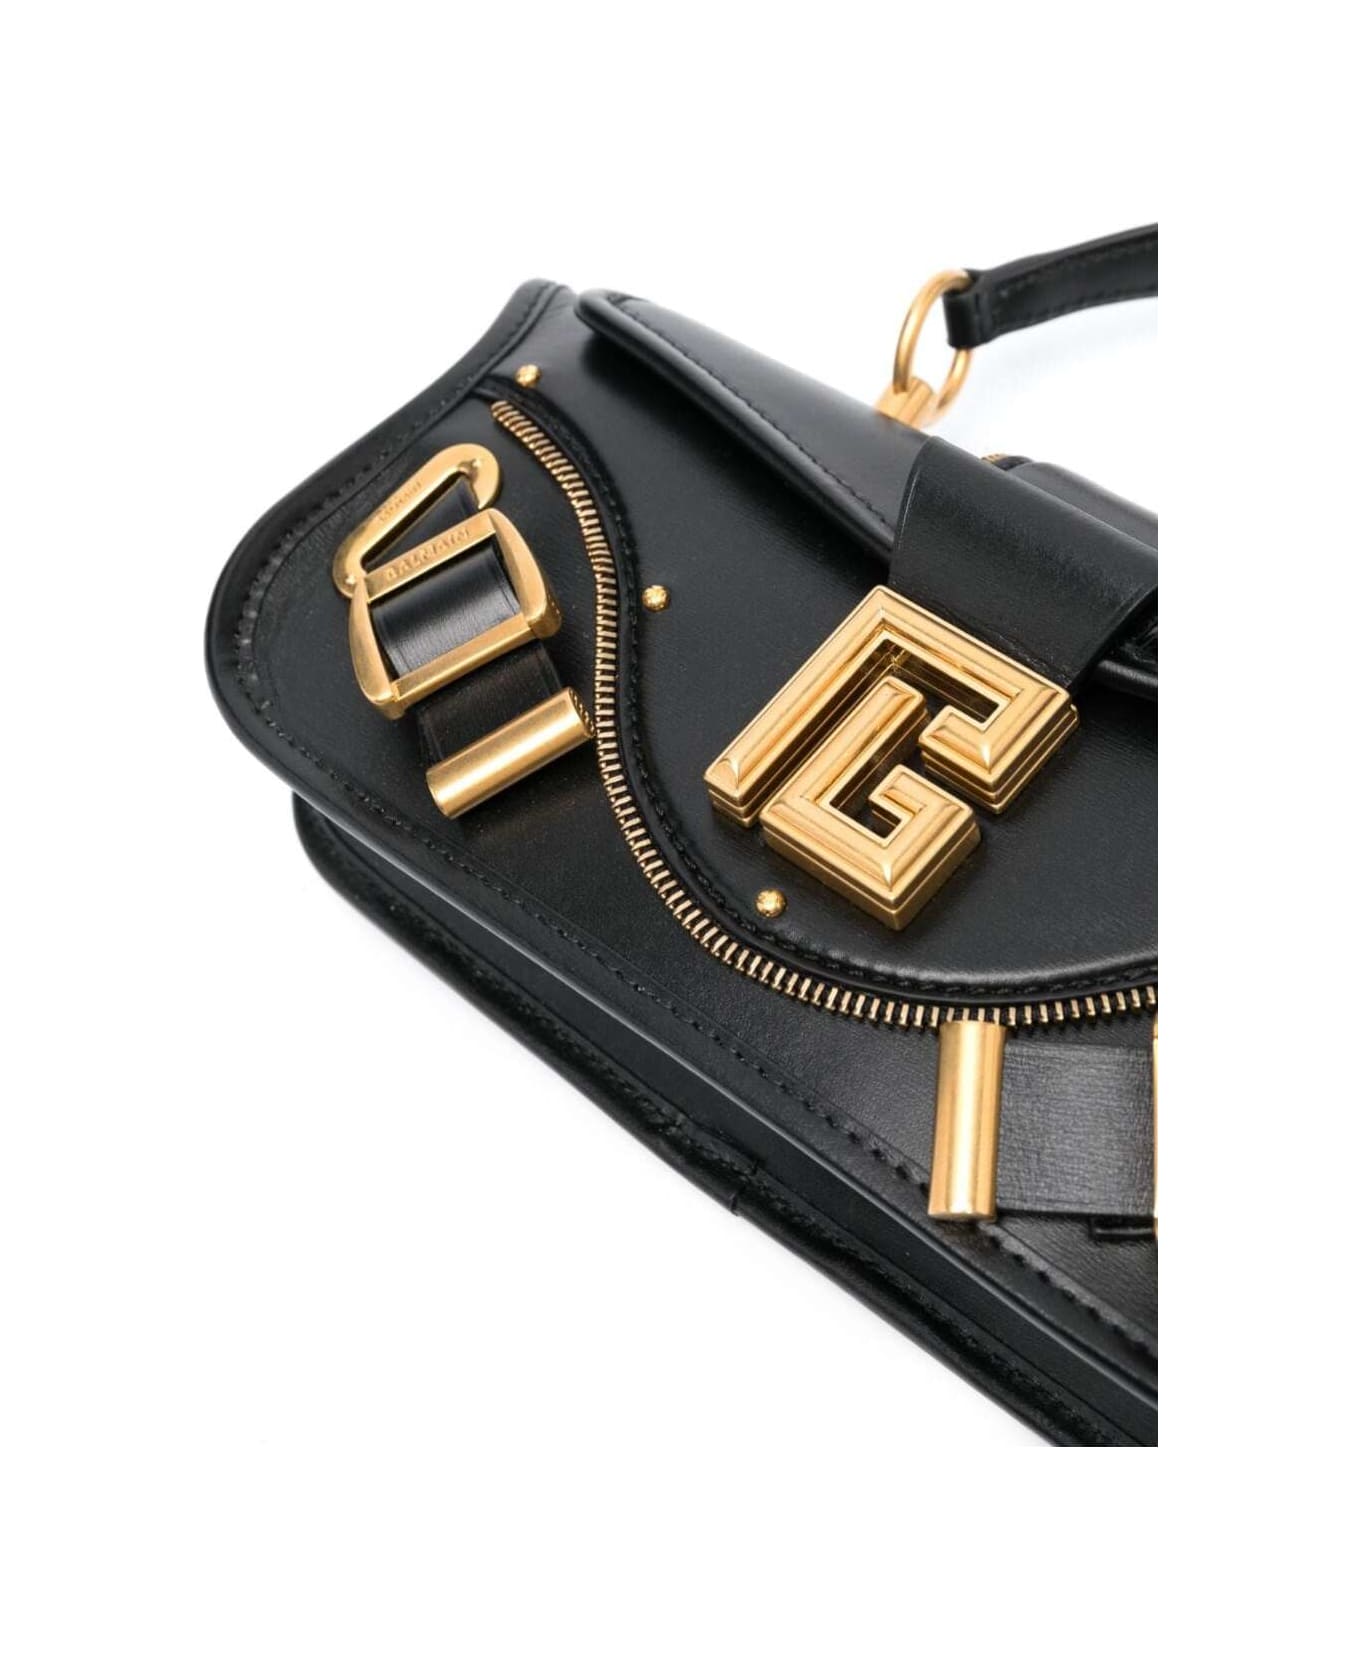 Balmain 'blaze' Black Clutch Bag With Pb Logo And Buckles In Smooth Leather Woman - Nero